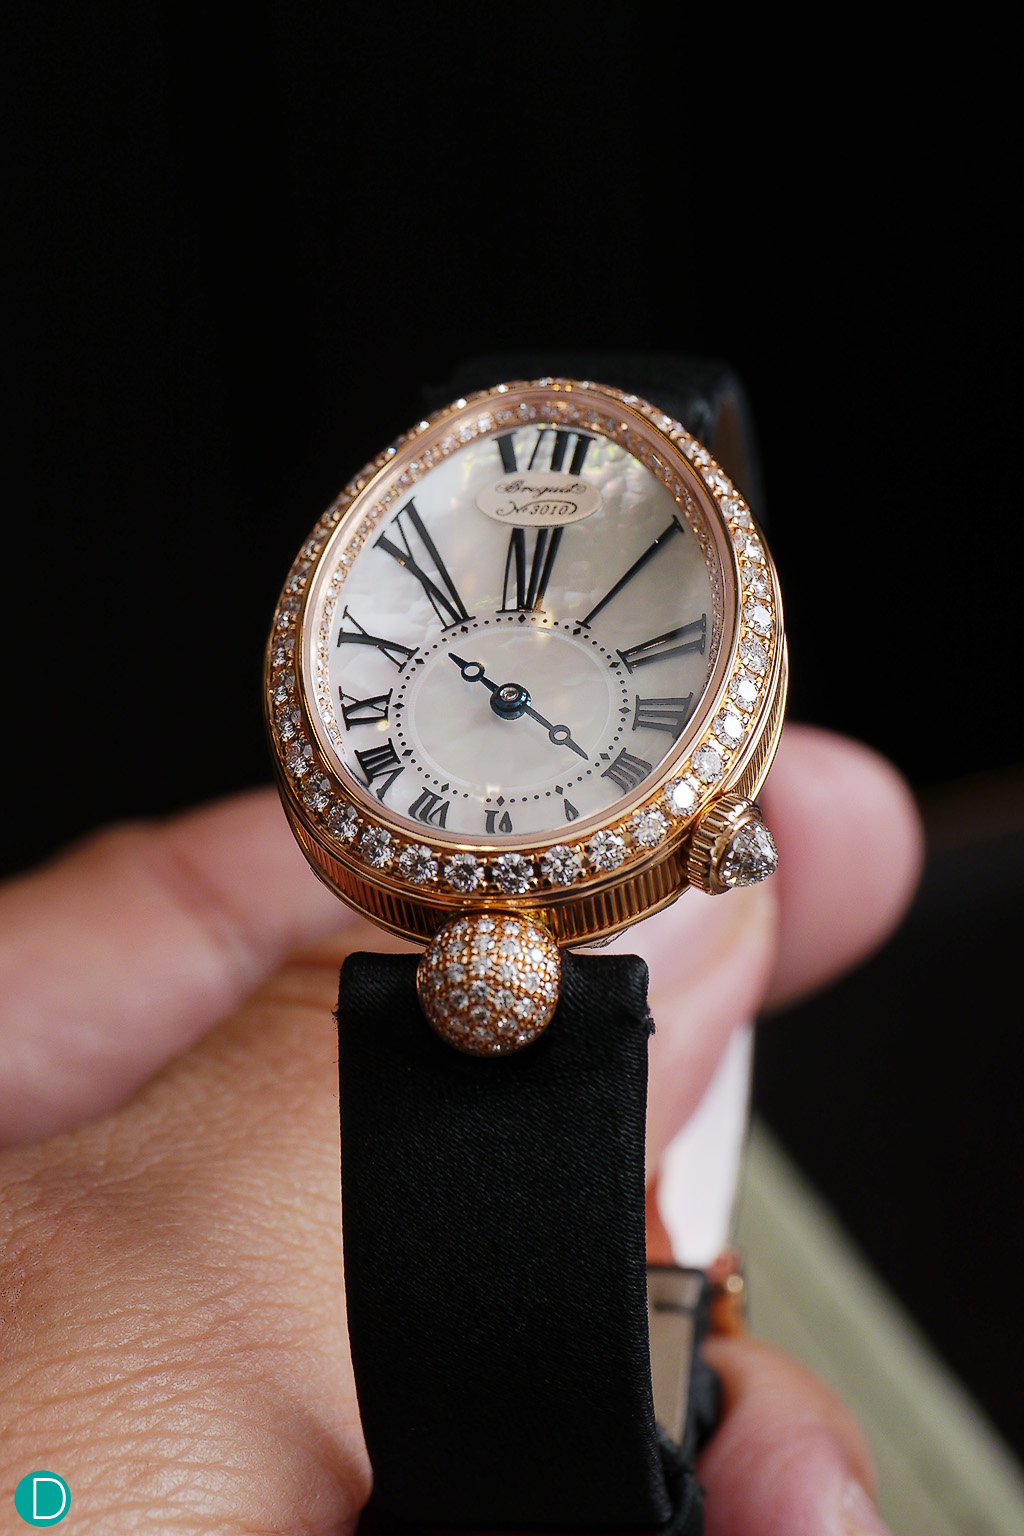 Breguet Reine de Naples' egg shaped case manages to be elegant while remaining understated, even when encrusted in diamonds.